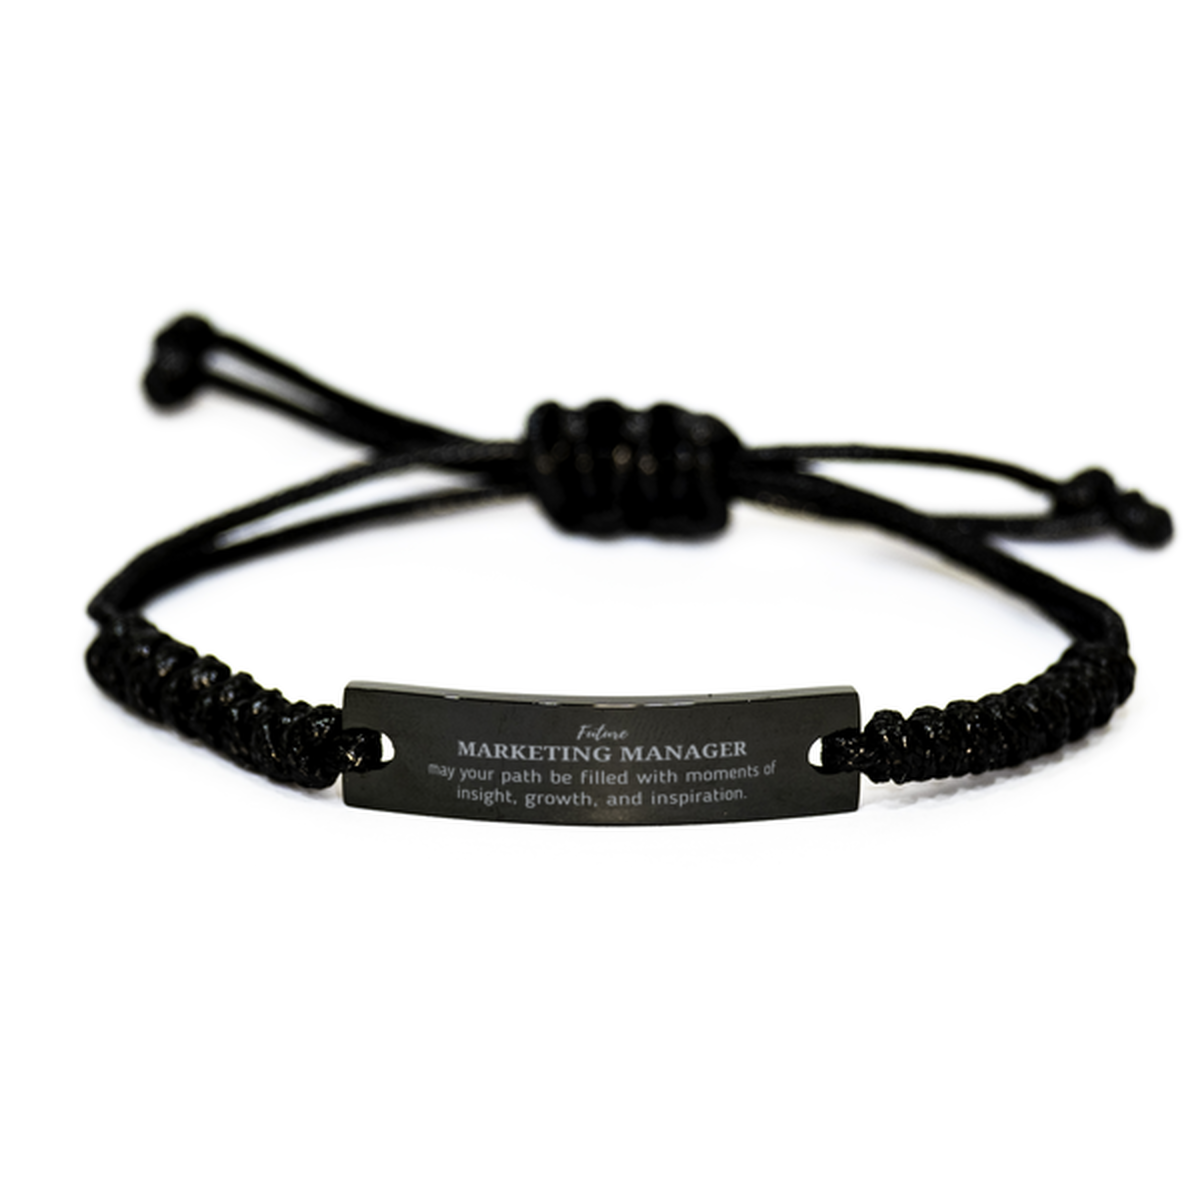 Future Marketing Manager Gifts, May your path be filled with moments of insight, Graduation Gifts for New Marketing Manager, Christmas Unique Black Rope Bracelet For Men, Women, Friends